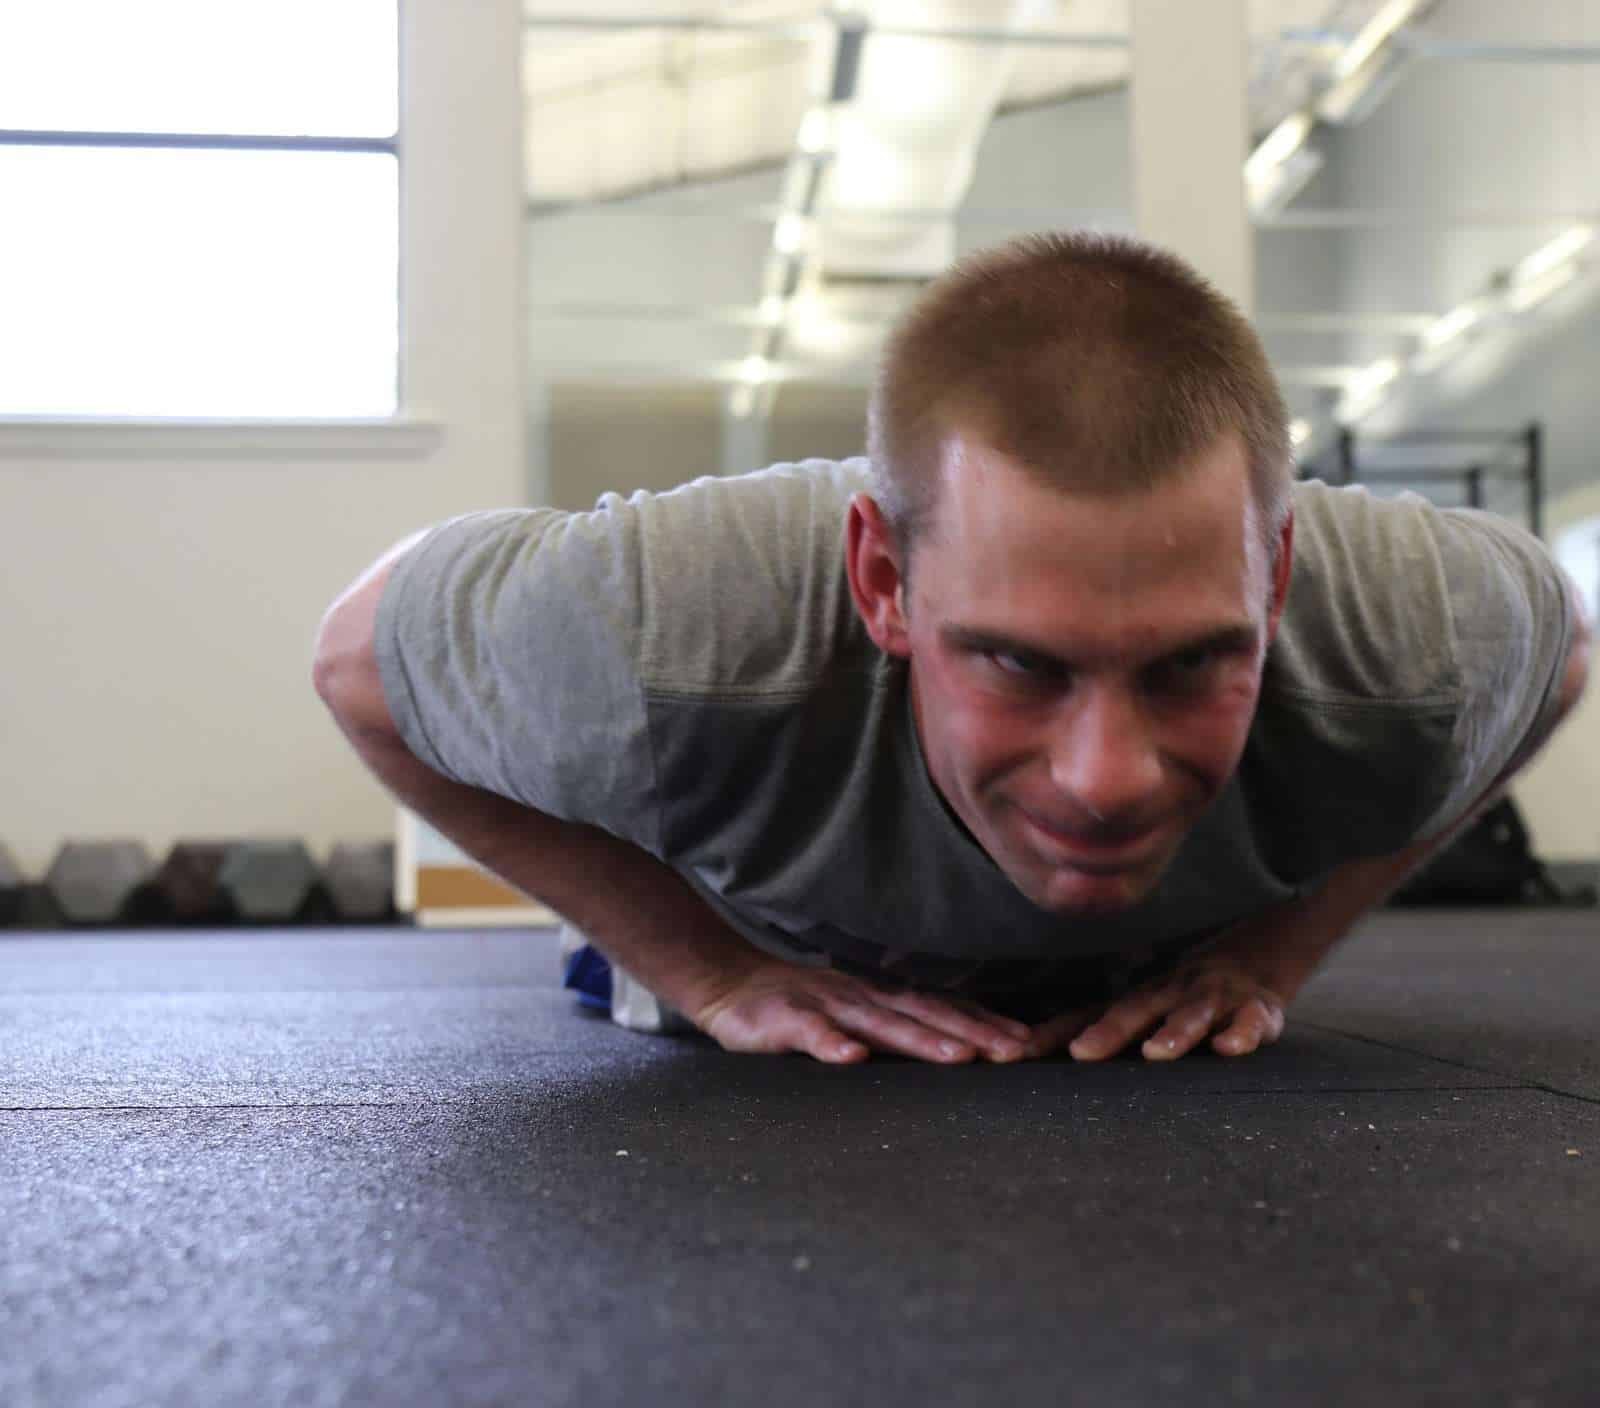 A man completes a diamond pushup